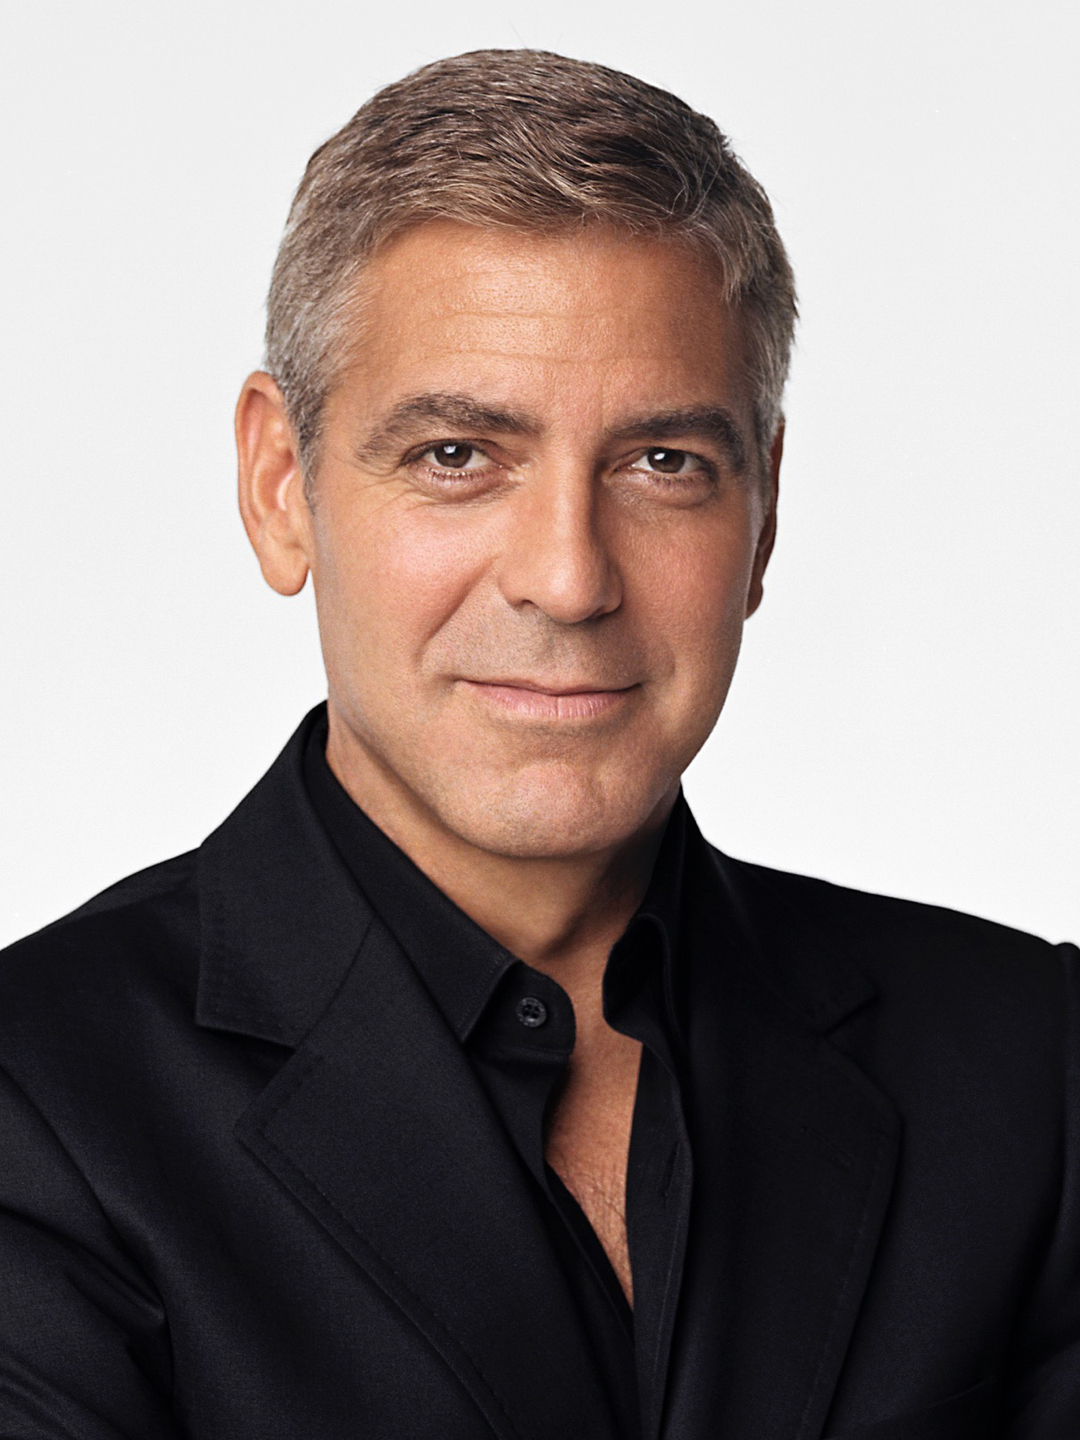 George Clooney story of success